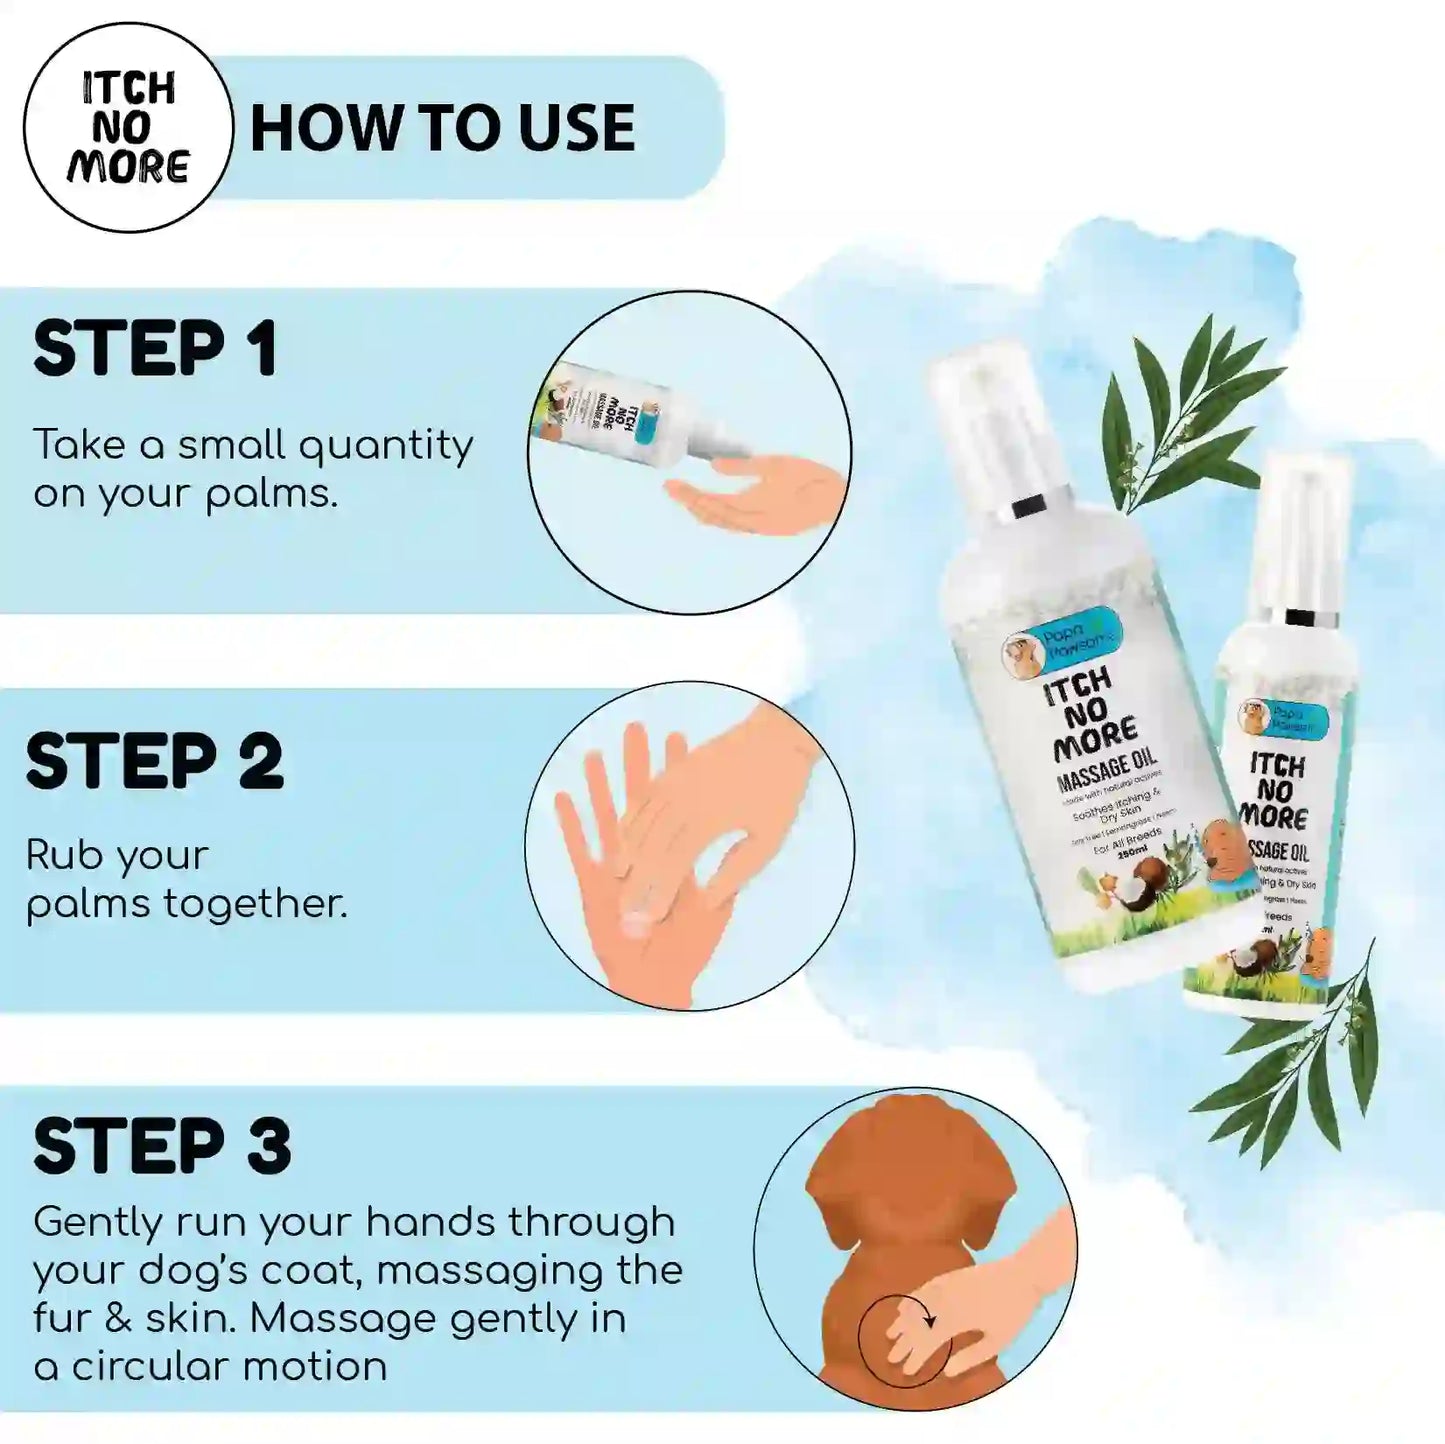 Care Kit Pro (Itch No More) + Free Palm Brush